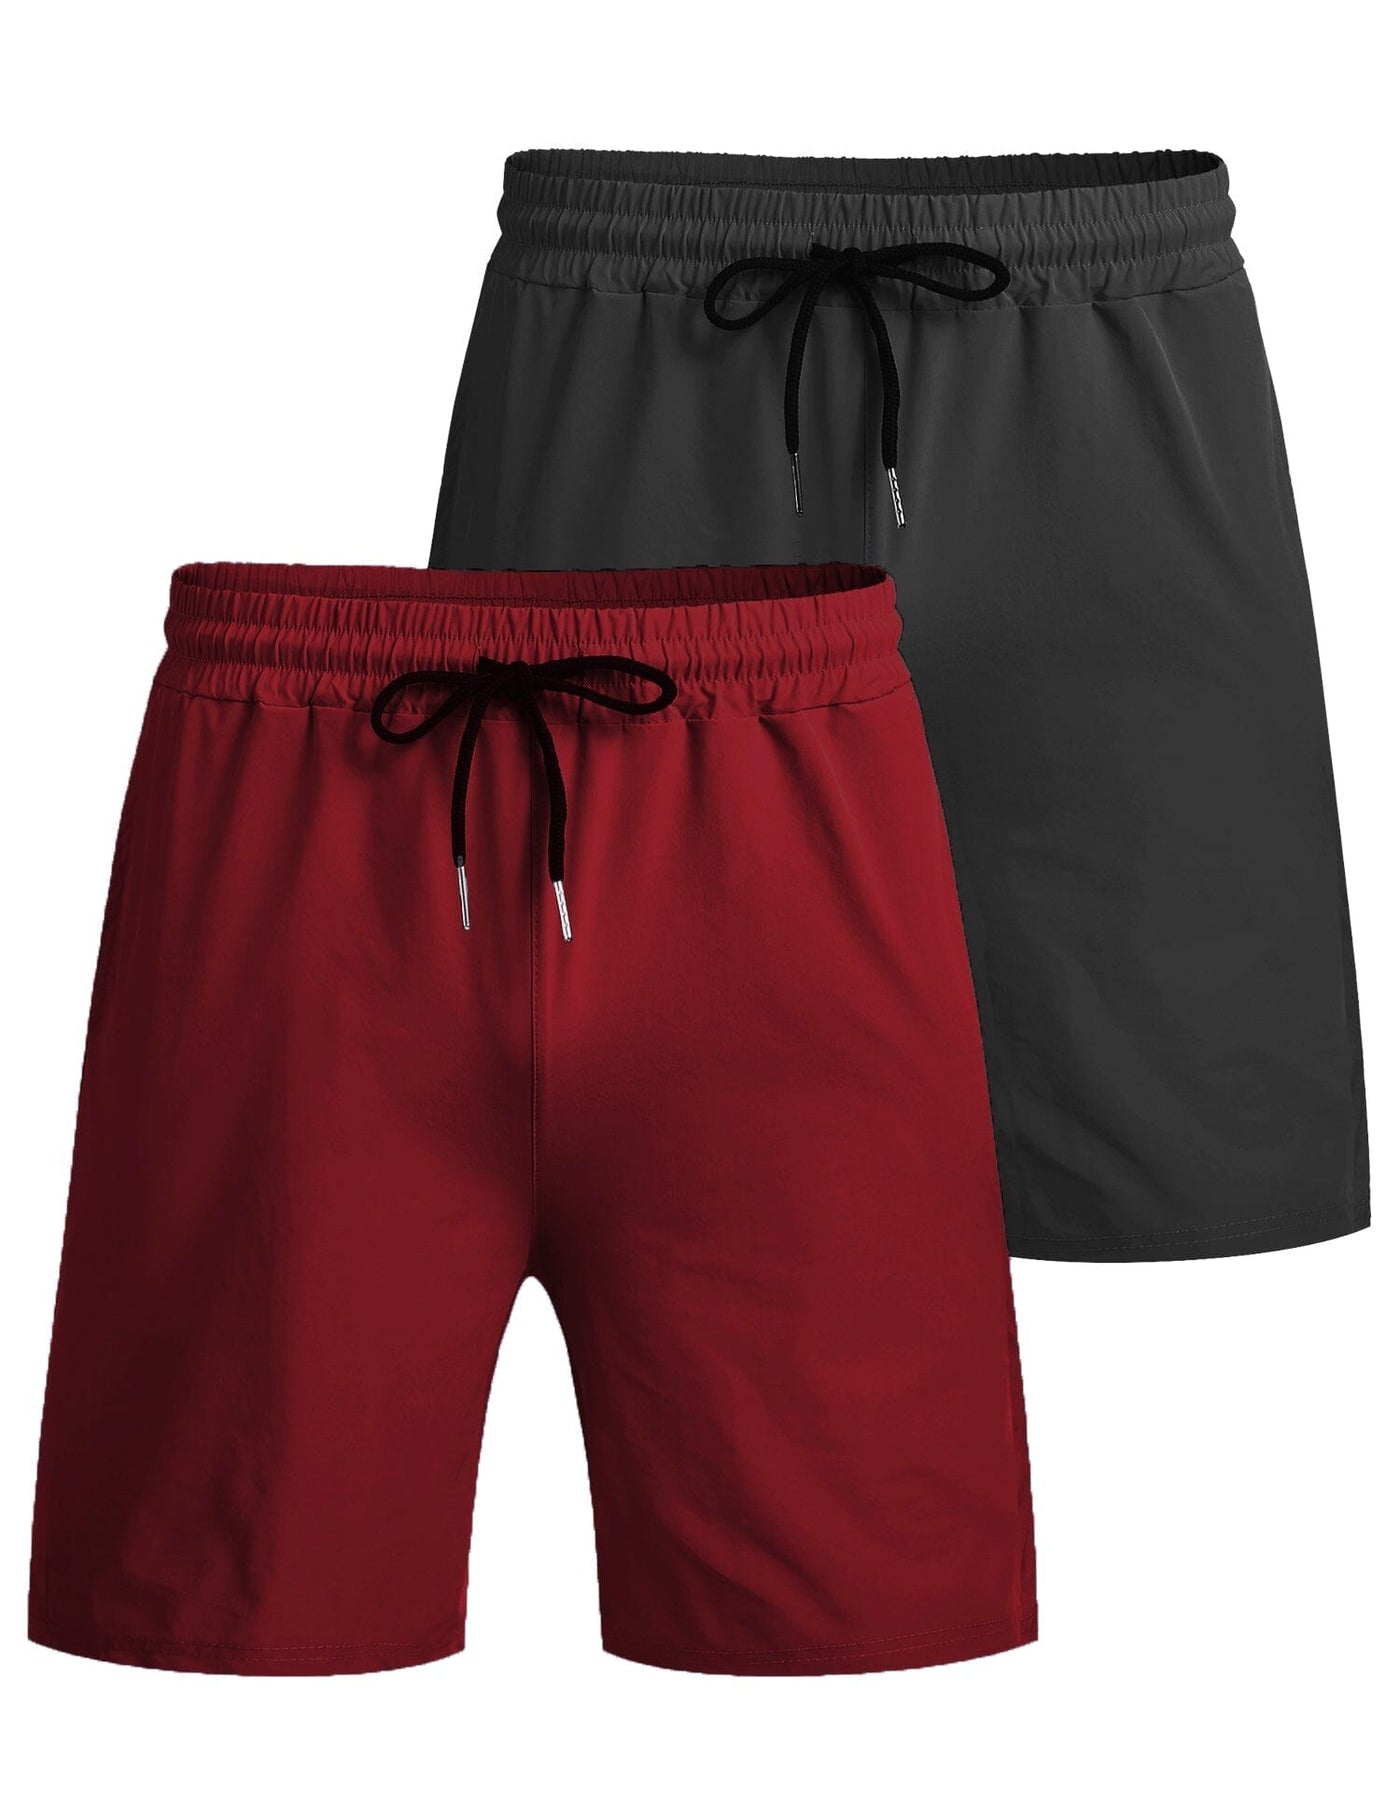 2-Pack Quick Dry Gym Shorts (US Only) Shorts coofandy Dark Grey/Wine Red S 